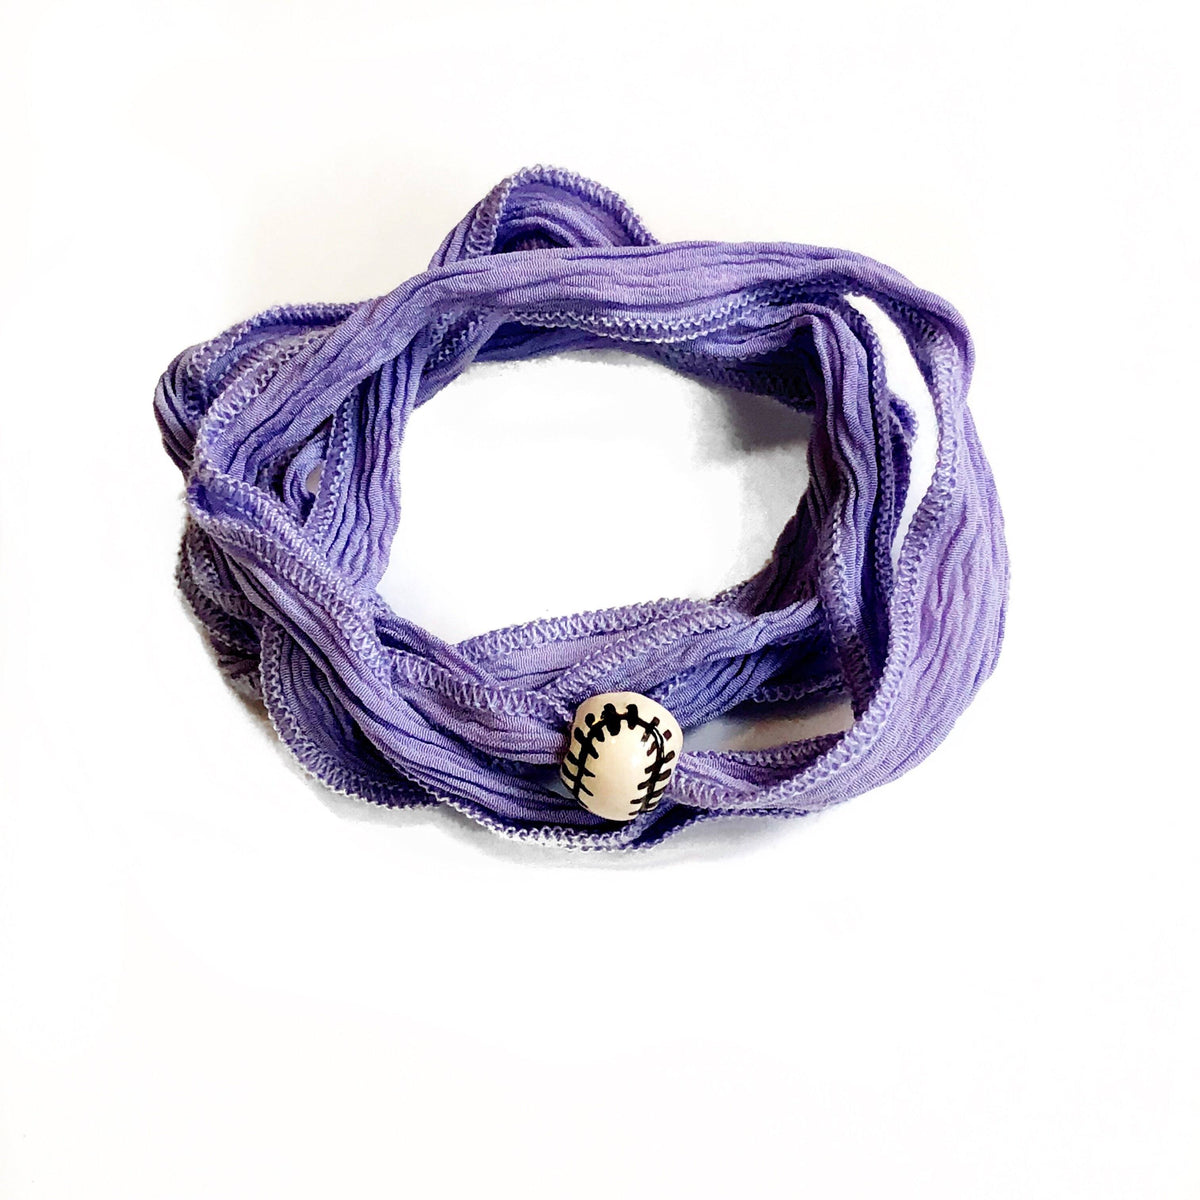 Lavender wrap with baseball charm Silk wrap hand made, and hand dyed.